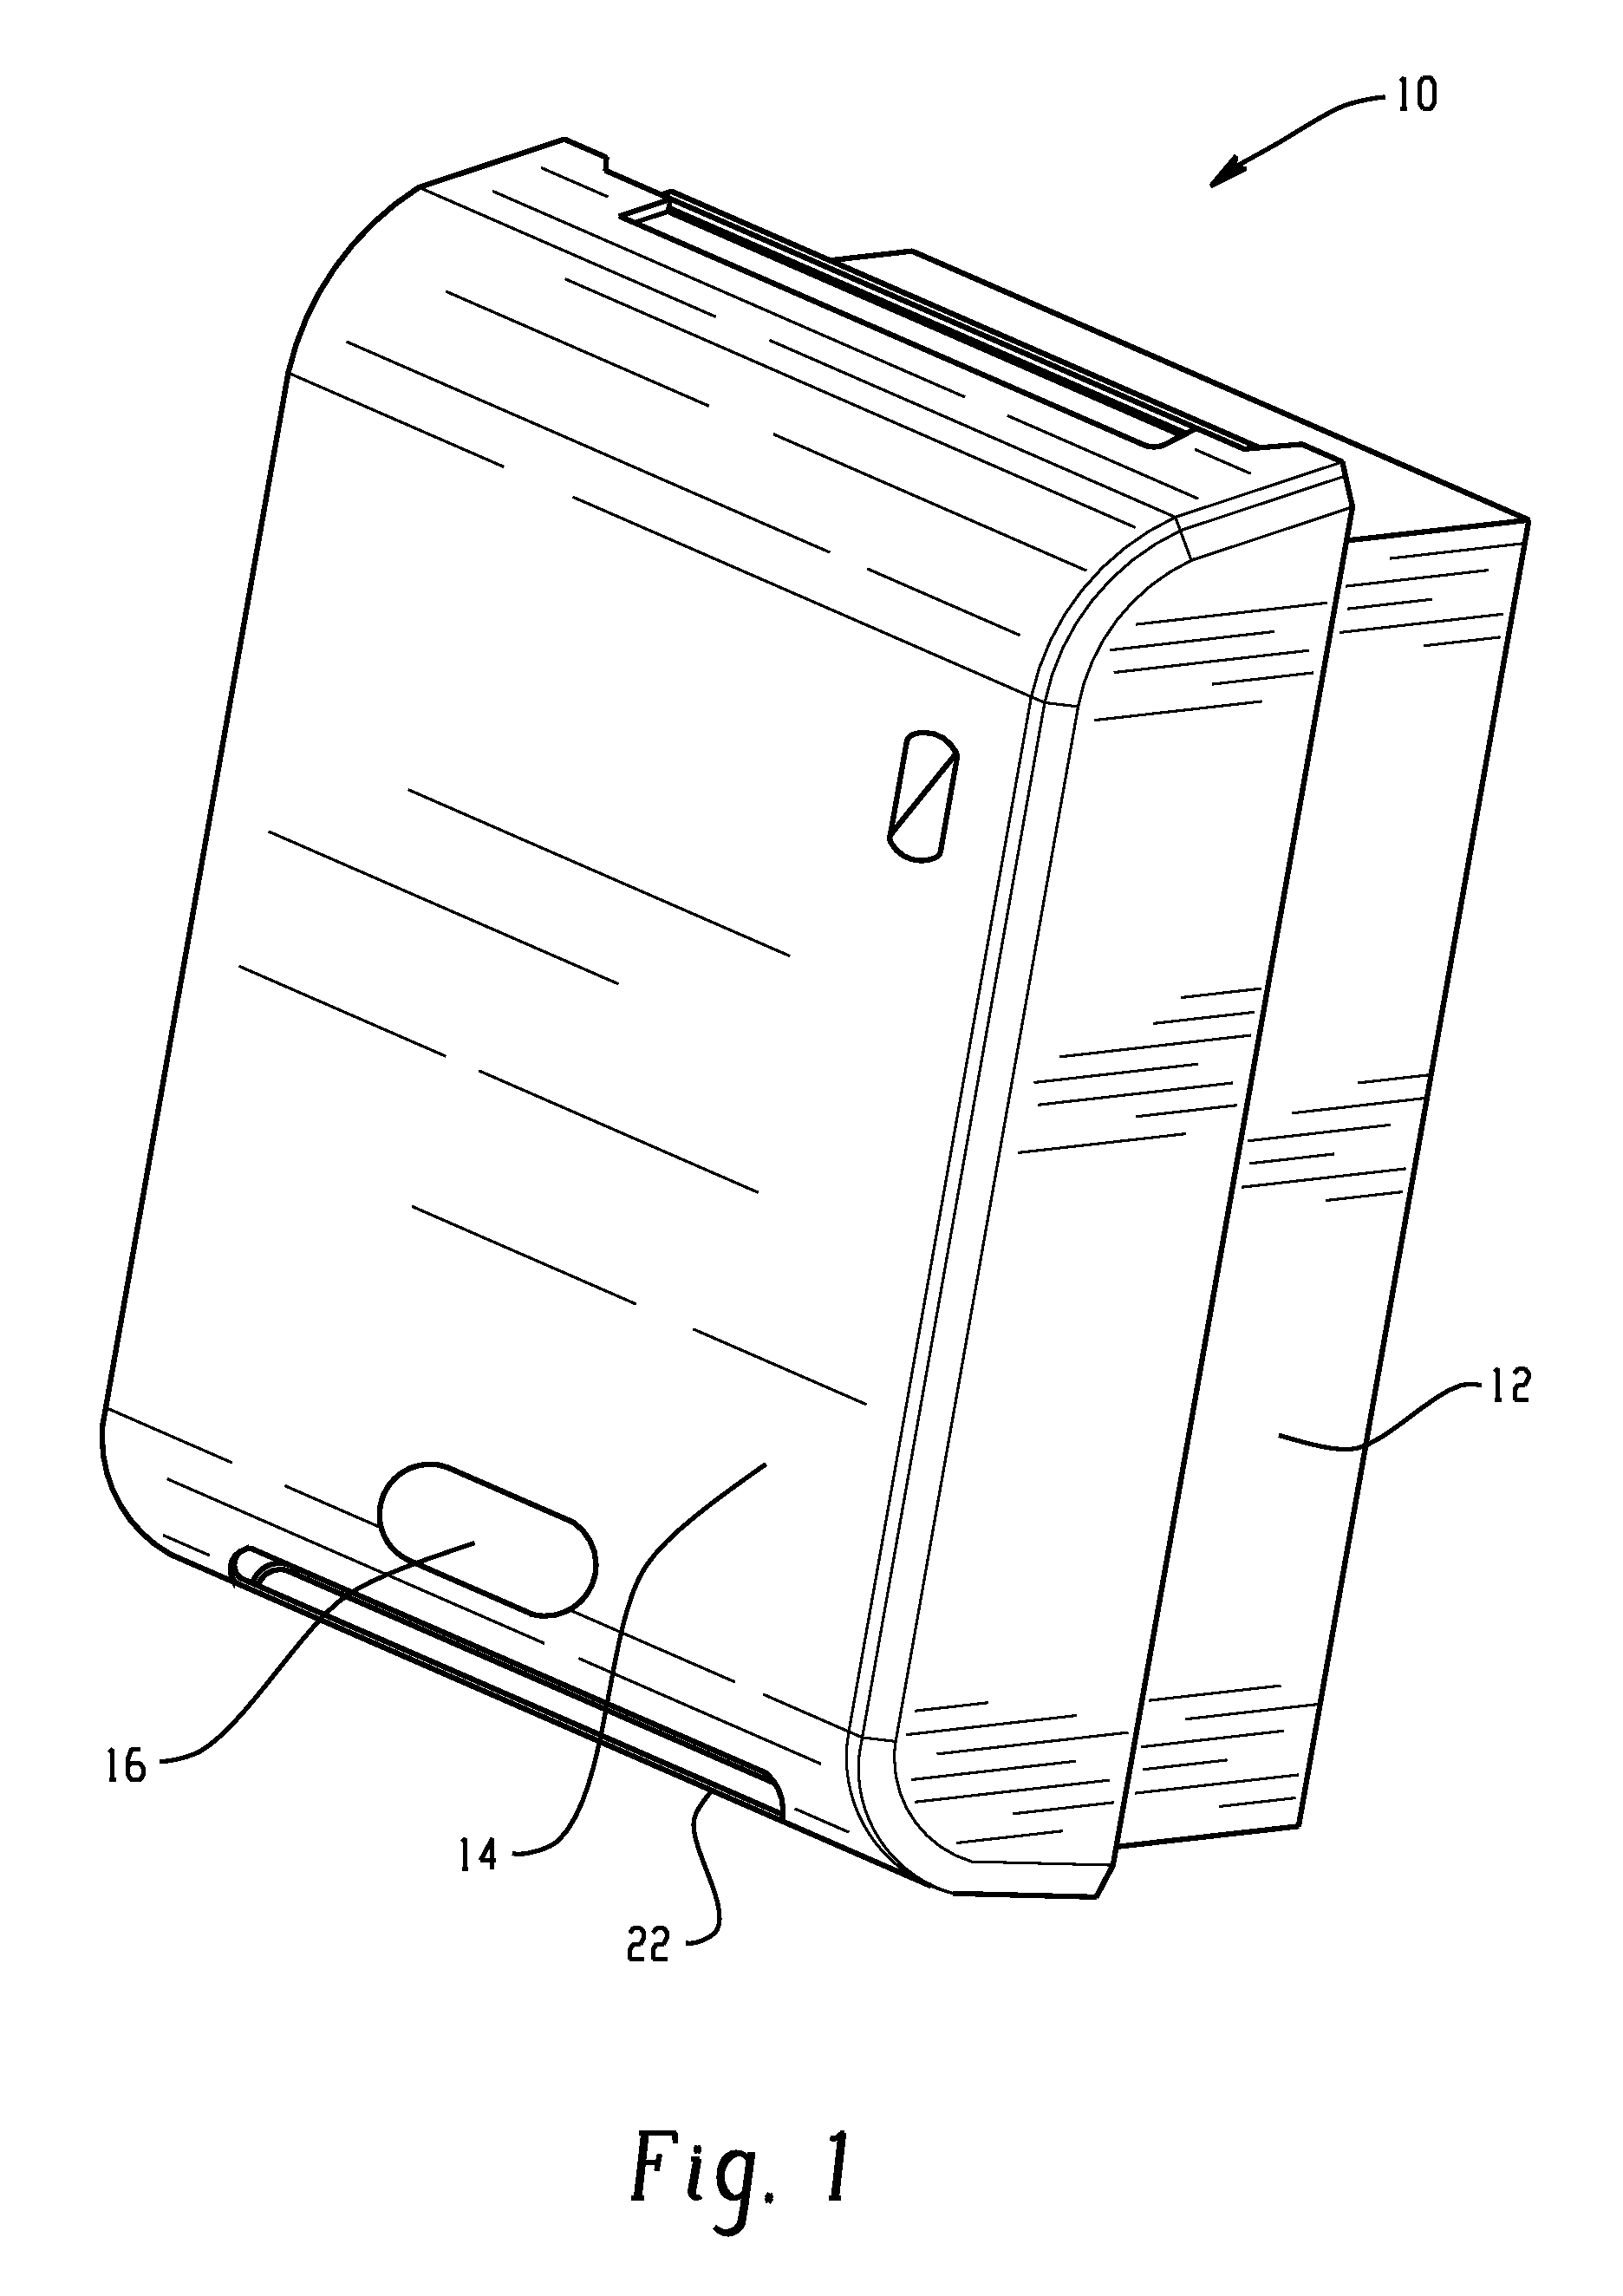 Electronic Dispenser for Dispensing Sheet Products